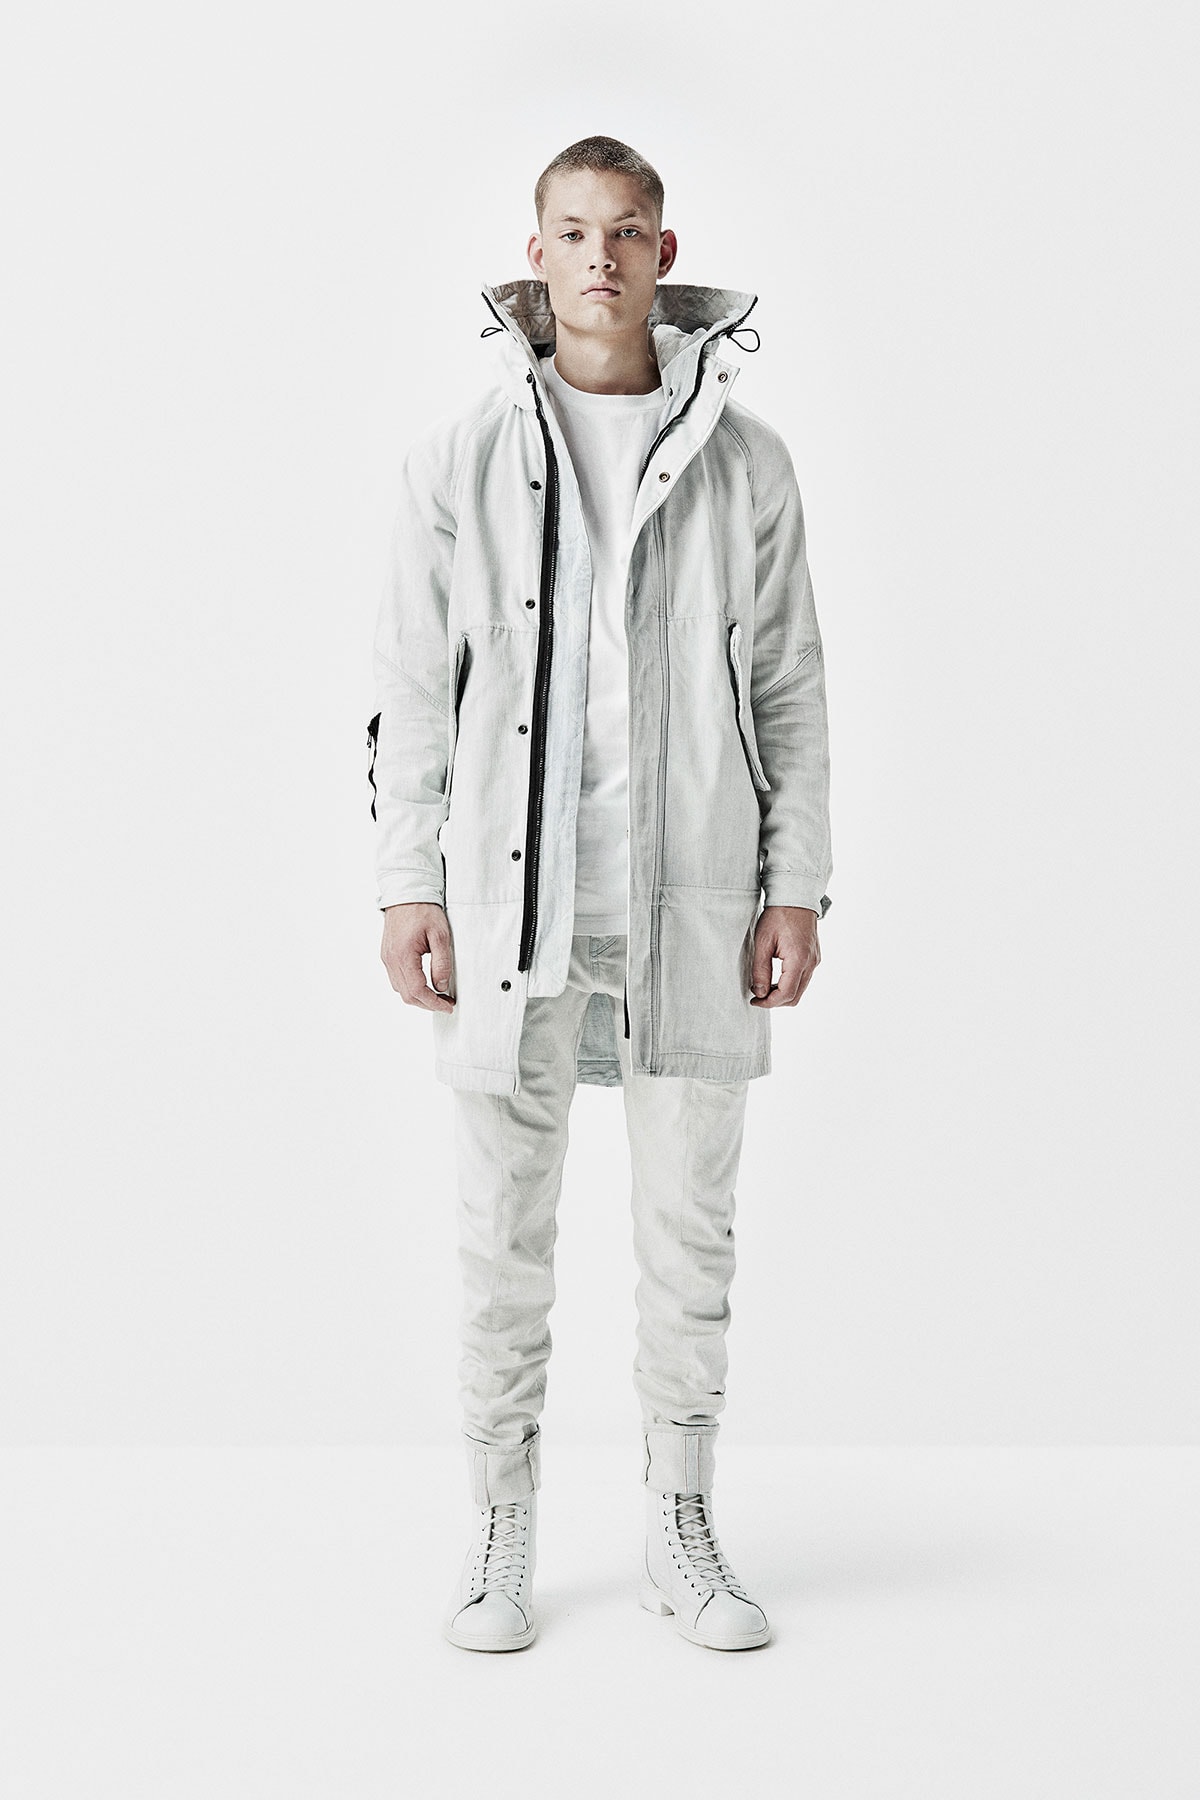 G-Star RAW Research 2016 FW Collection